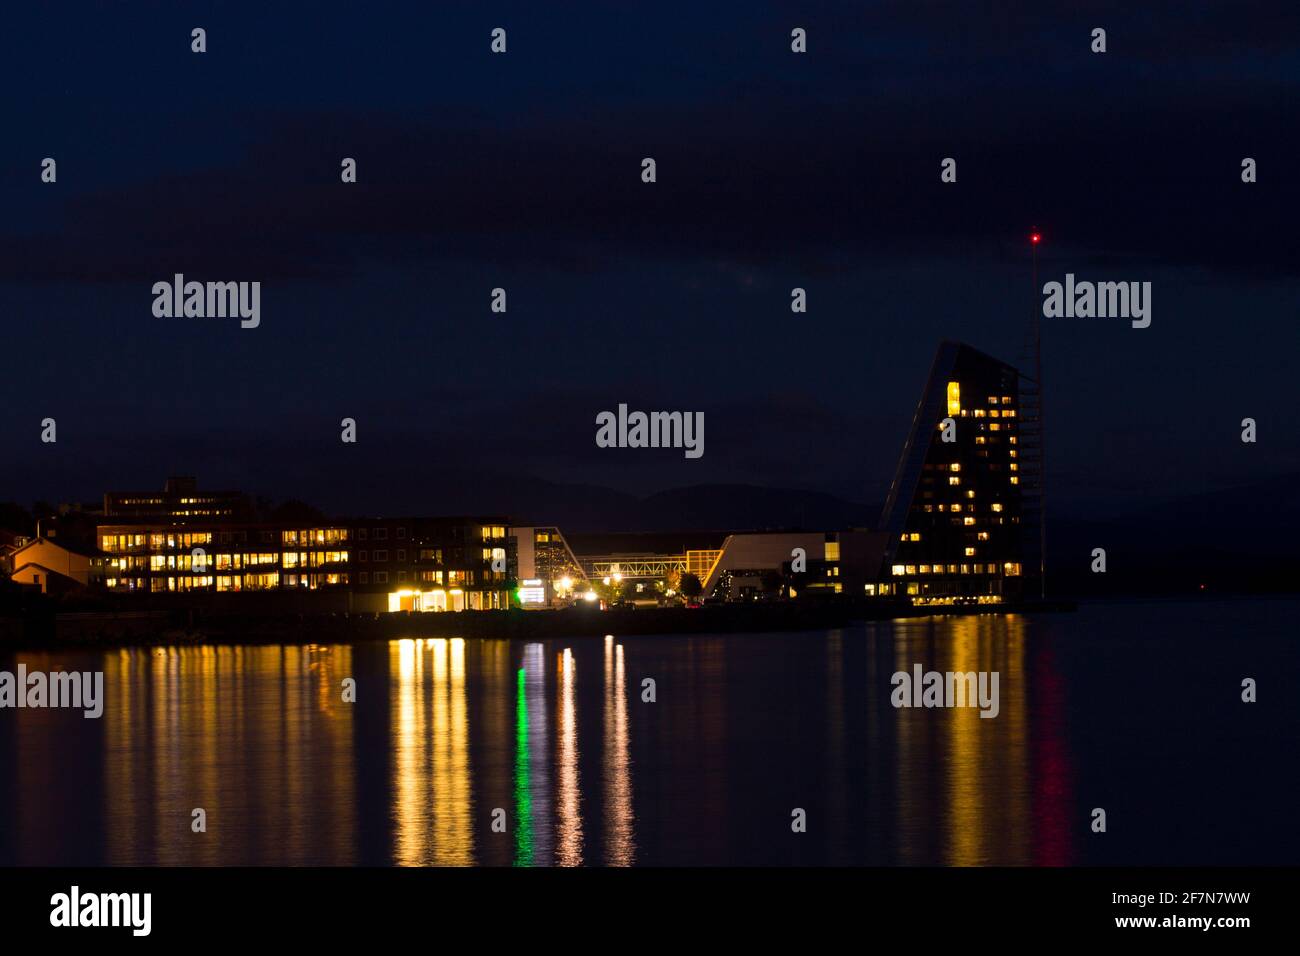 night, light reflections in water. hotel and store buildings in norway. Stock Photo